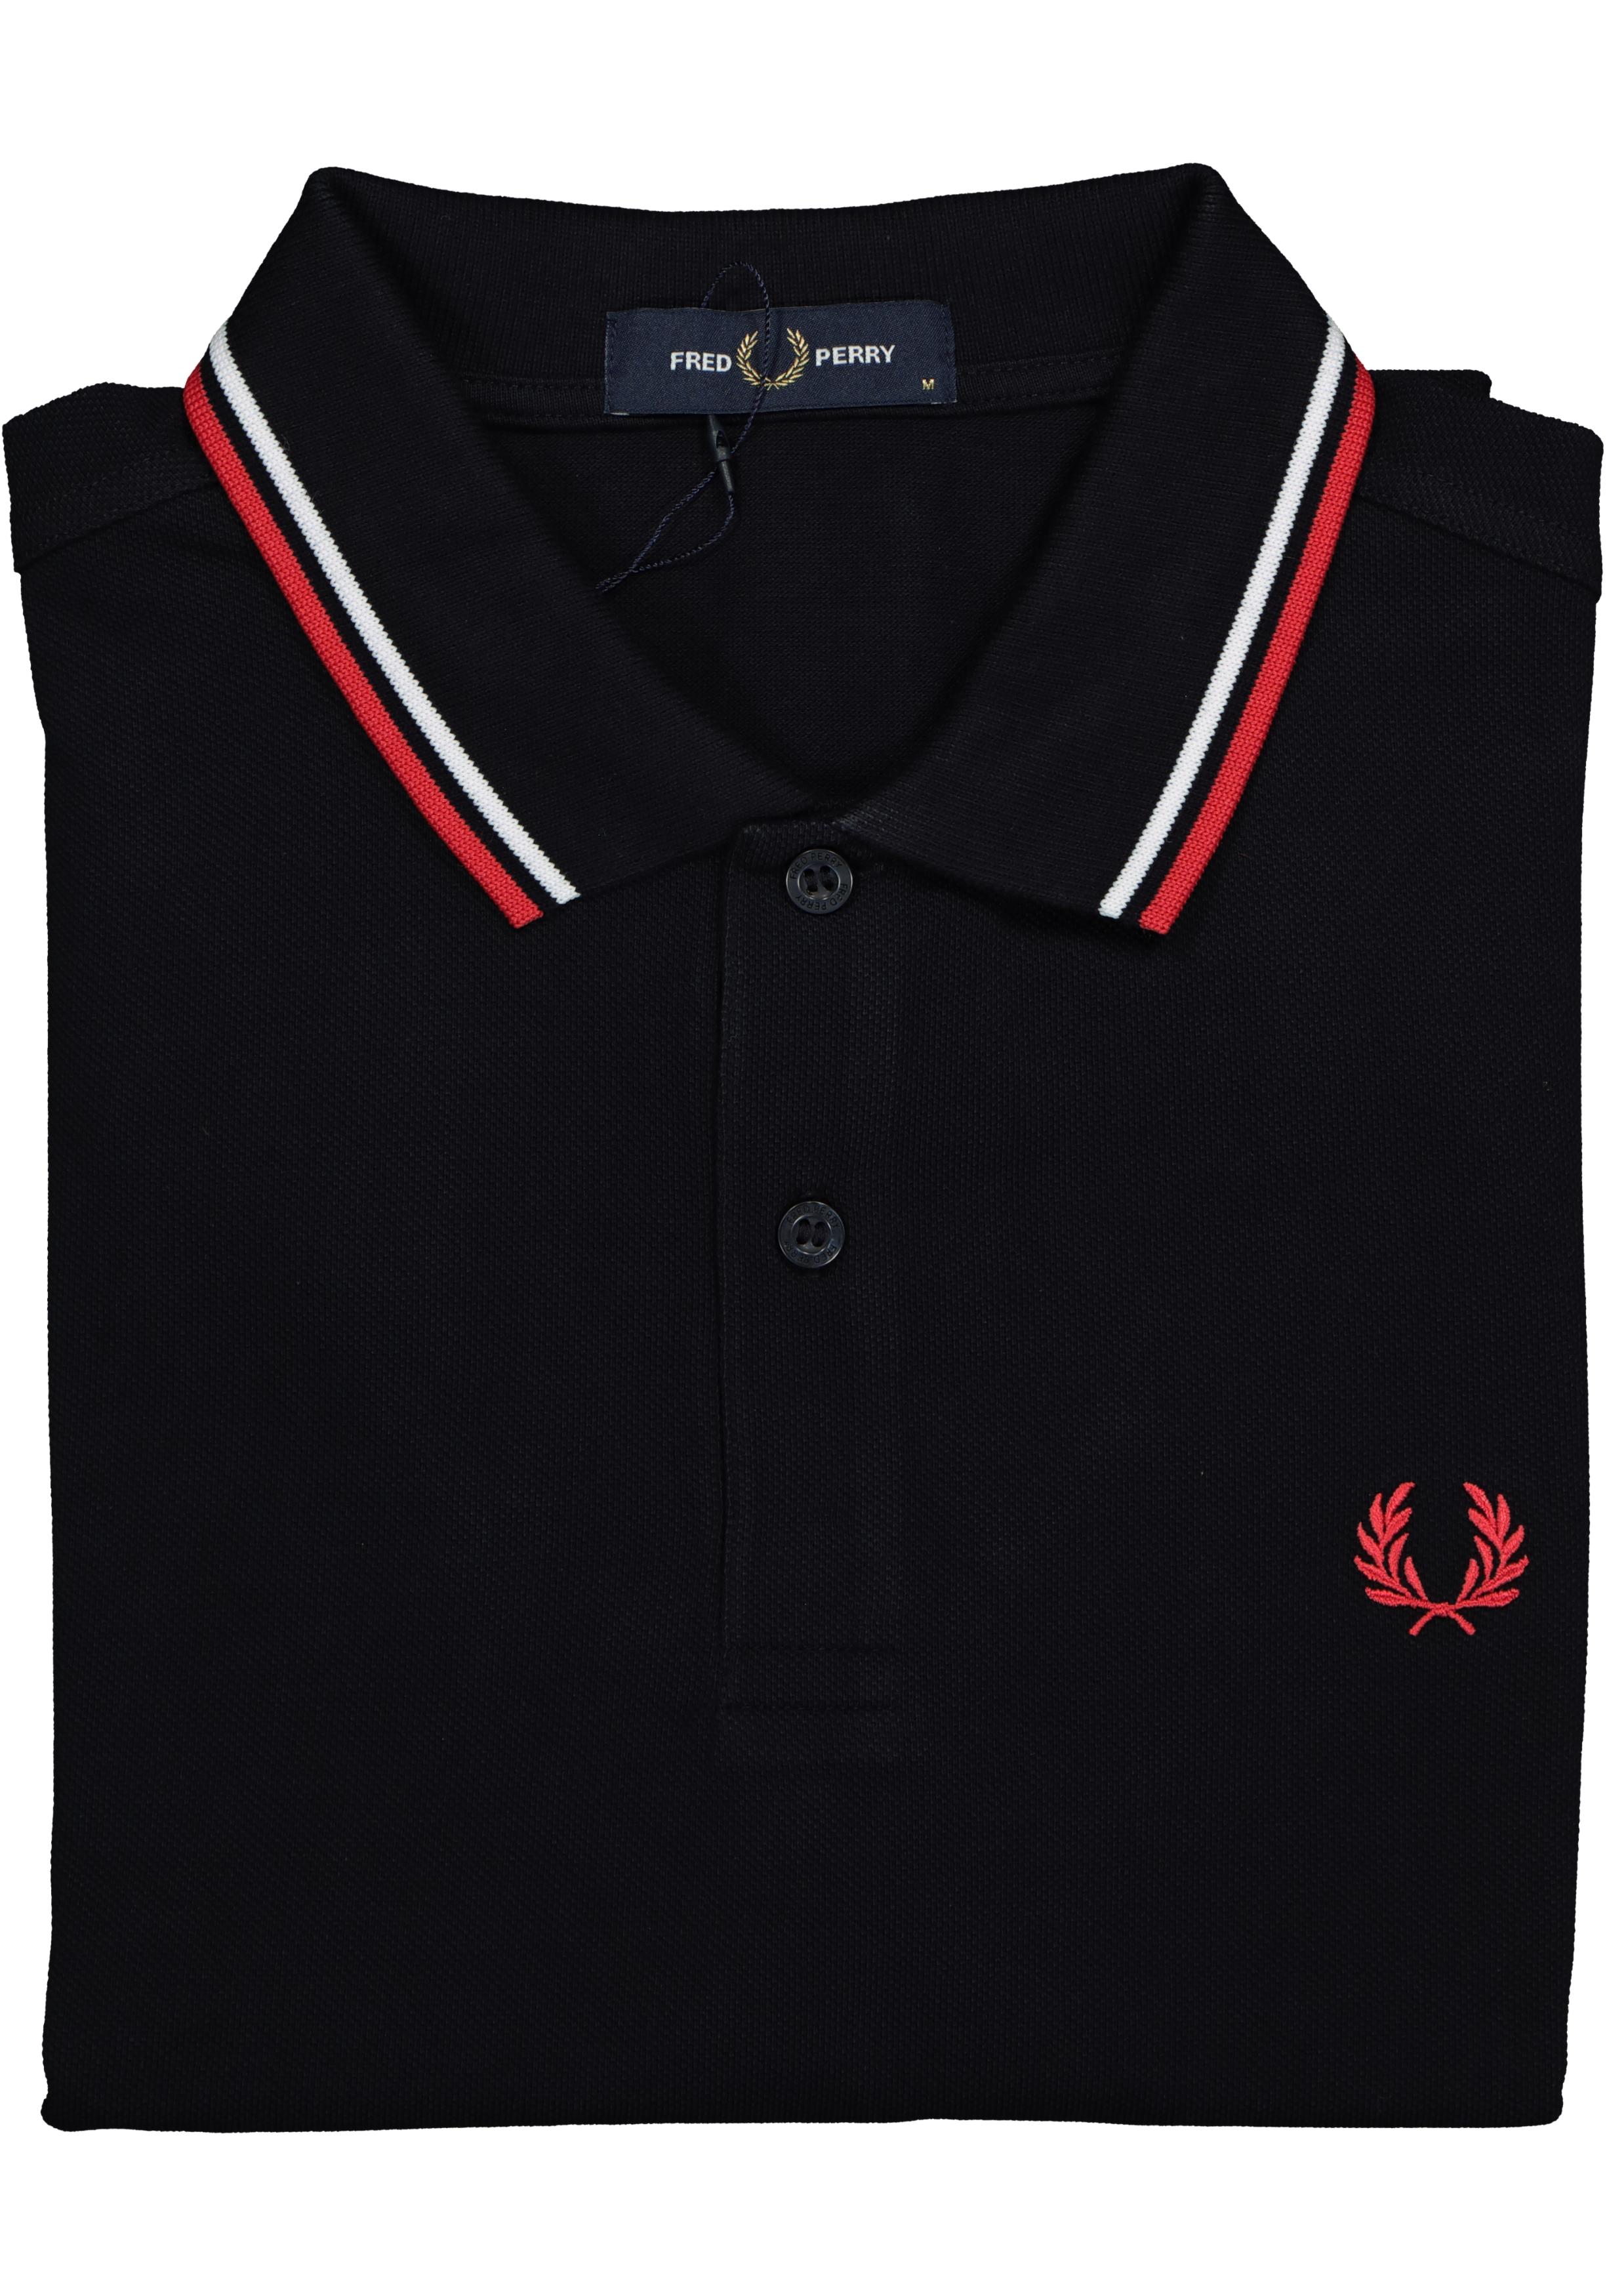 Overstijgen Harnas Aubergine Fred Perry M3600 polo twin tipped shirt, heren polo Navy / White / Red -  20% Paaskorting op (bijna) alles